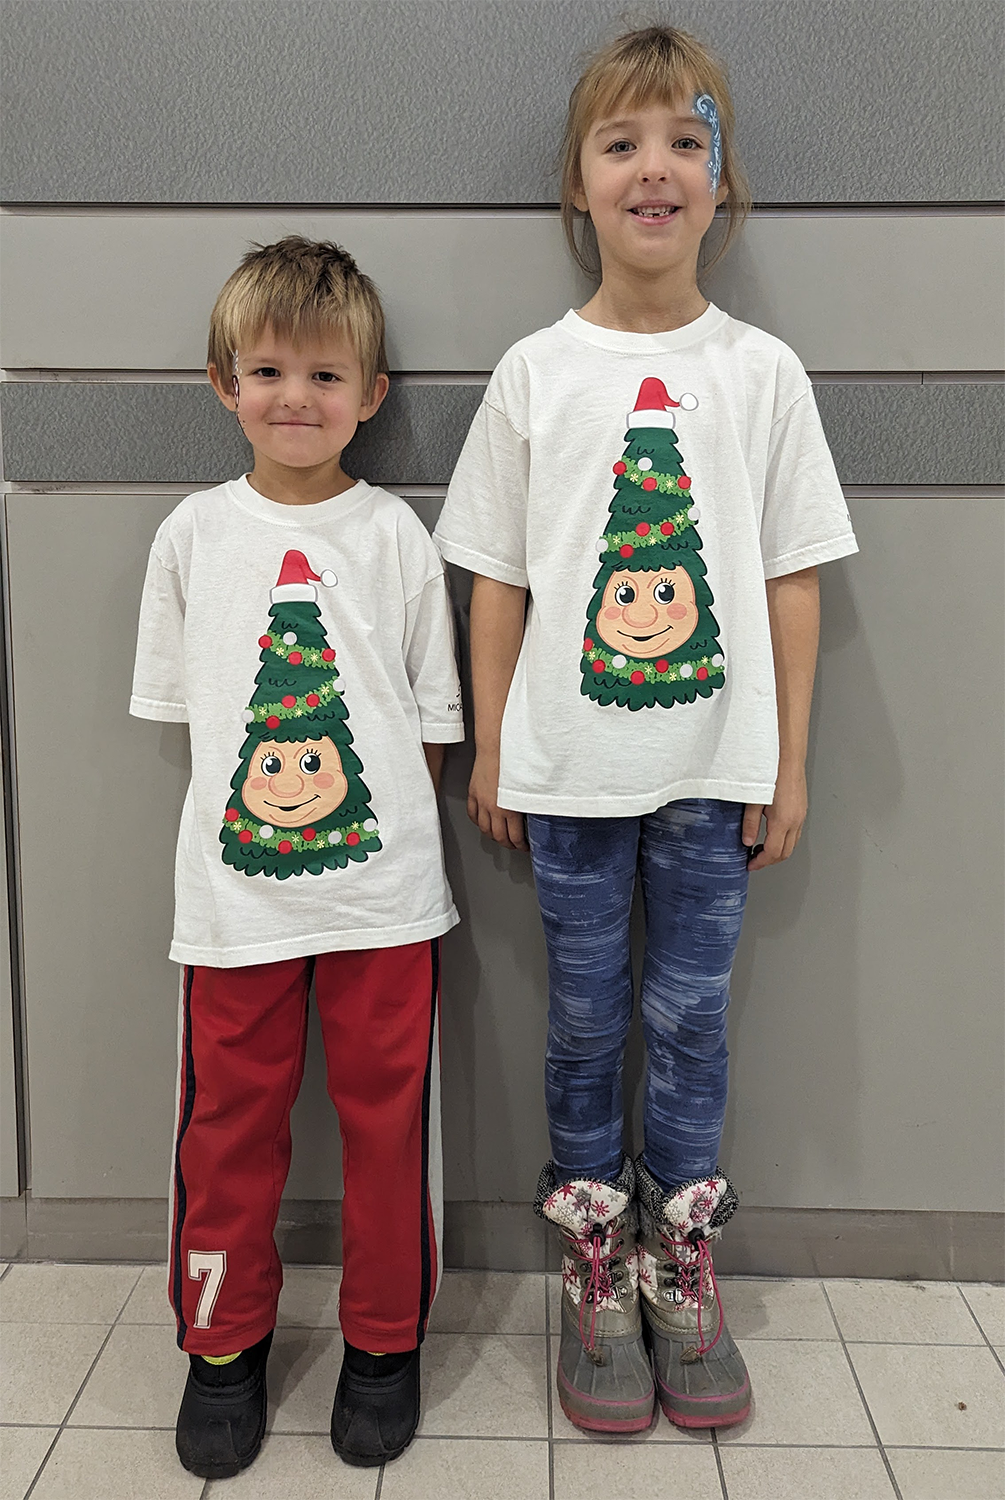 A young brother and sister stand in front of a grey wall smiling at the camera with Christmas inspired face paint. They wear white T-shirts with Woody the Talking Christmas Tree on the front.